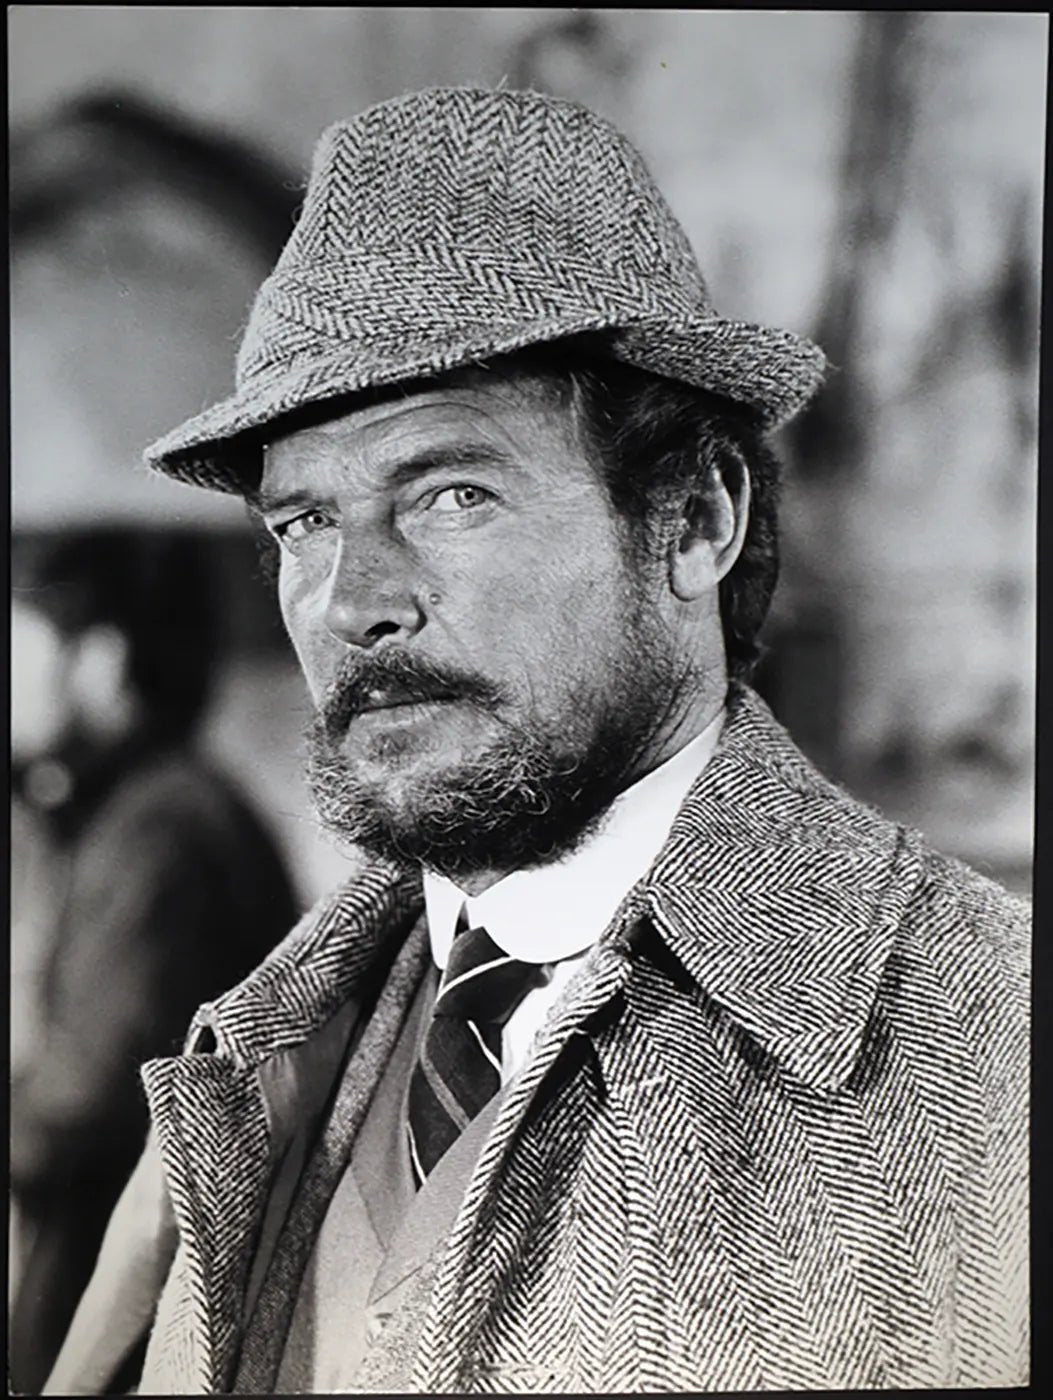 Roger Moore Film Sherlock Holmes a NY Ft 629 - Stampa 27x37 cm - Farabola Stampa ai sali d'argento